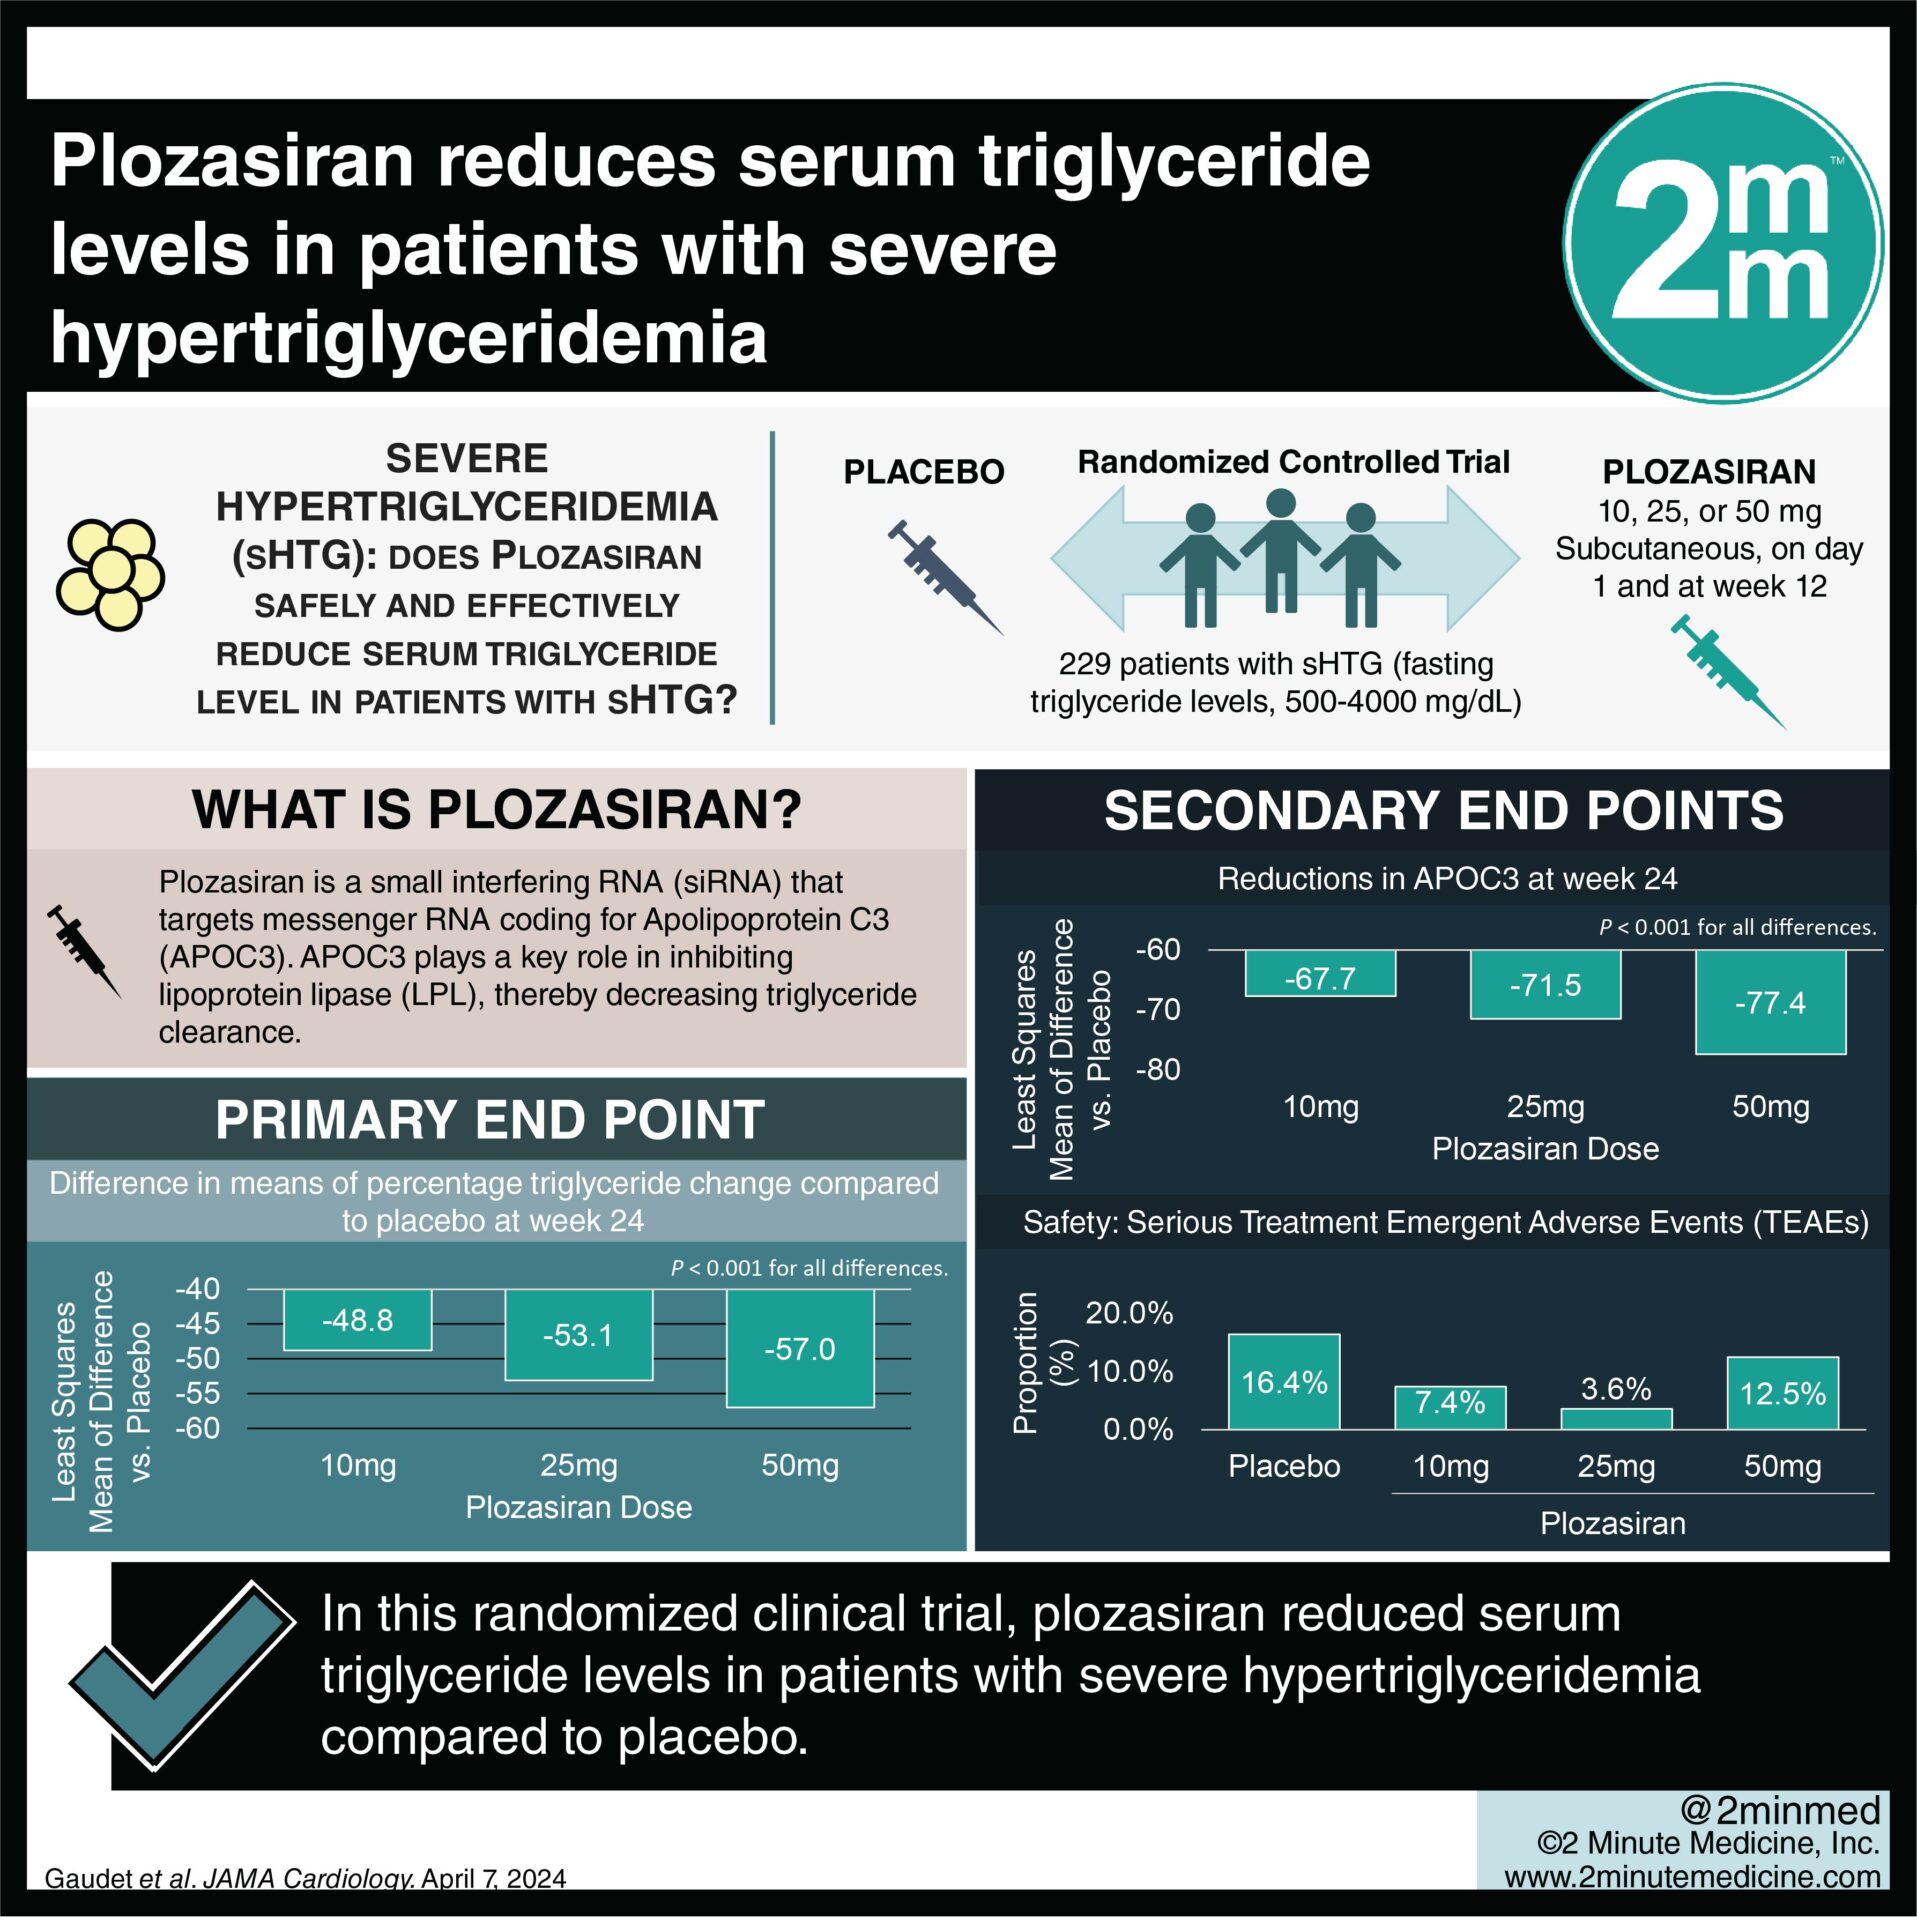 #VisualAbstract: Plozasiran reduces serum triglyceride levels in patients with severe hypertriglyceridemia